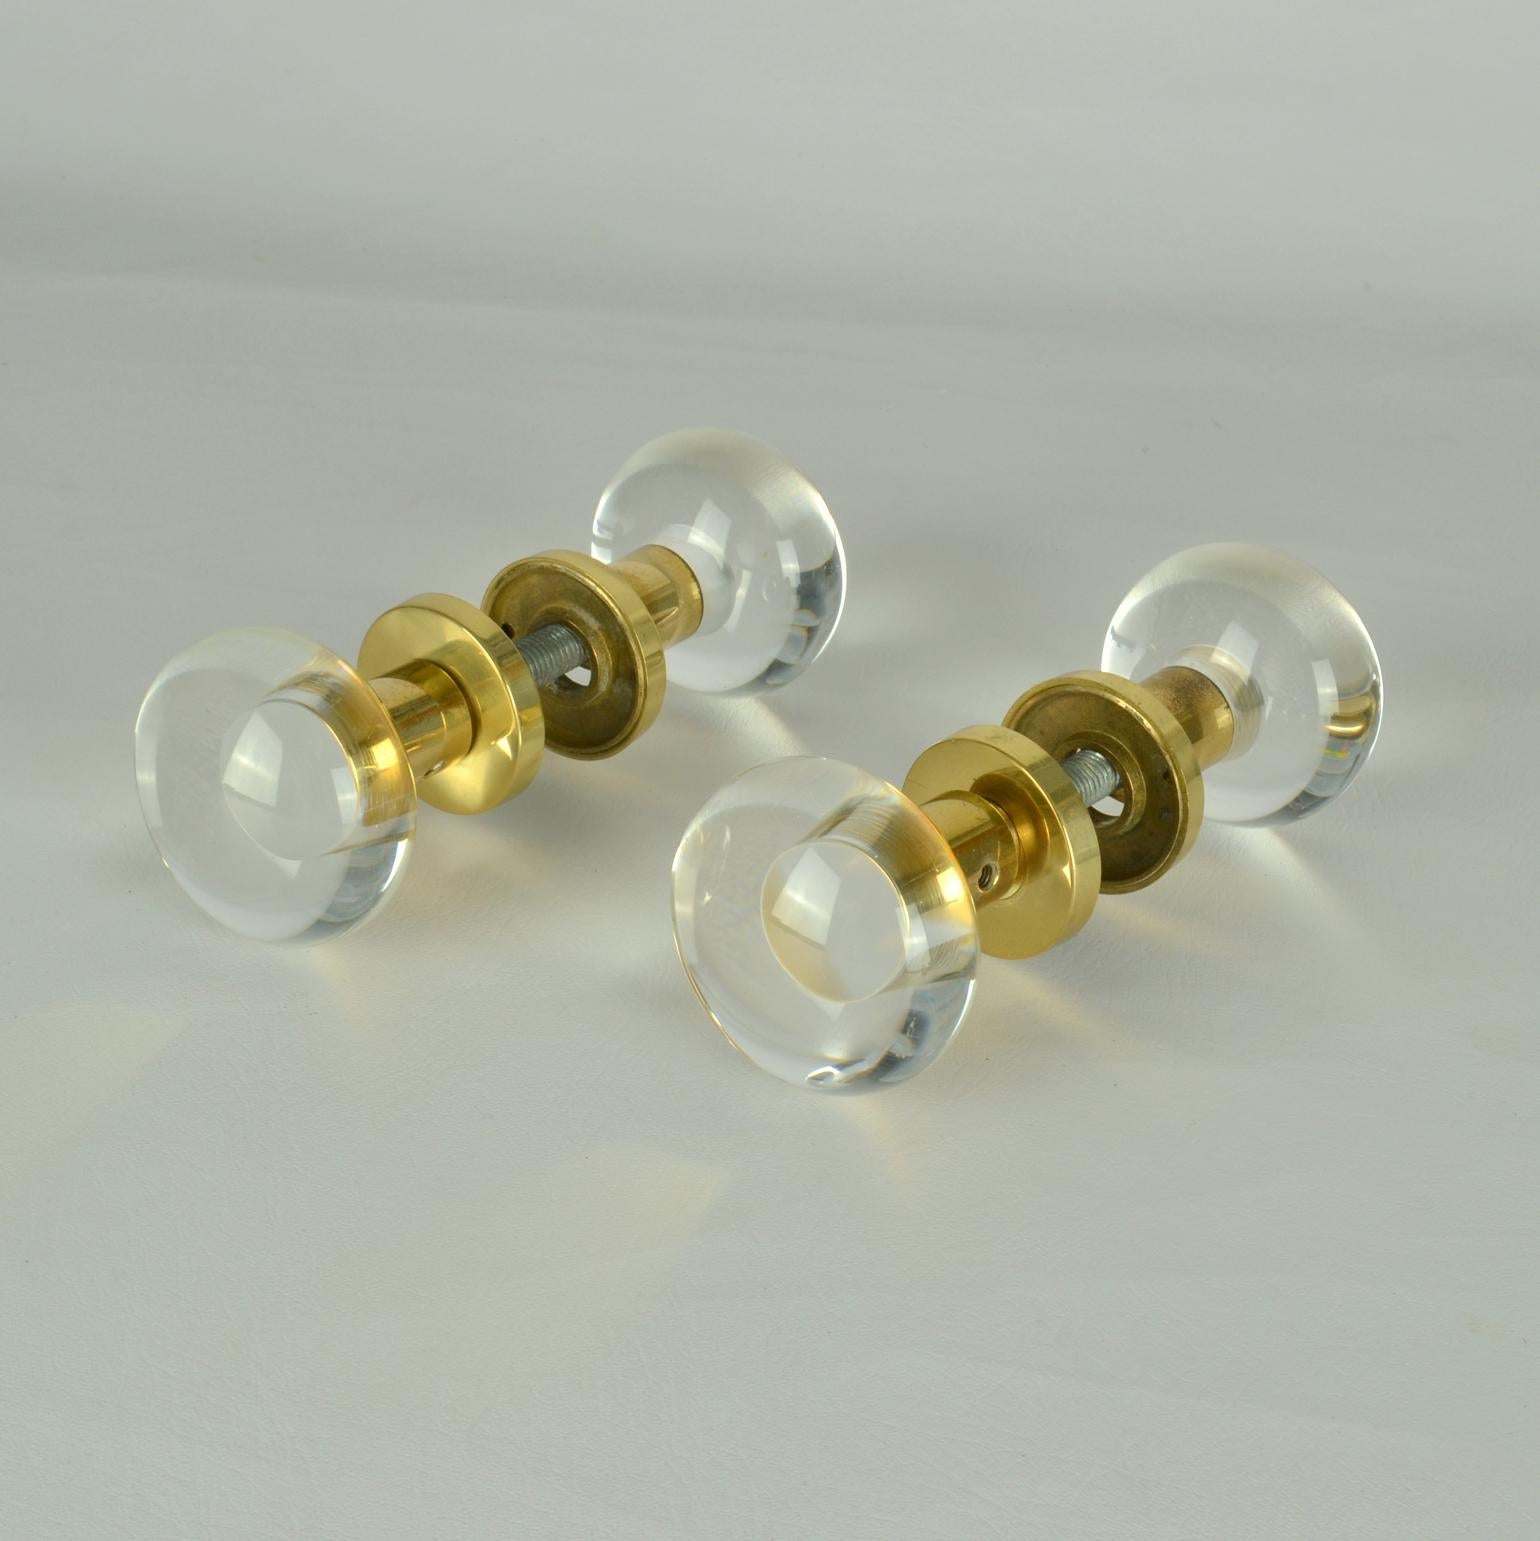 Round Push Pull Door Knobs in Acrylic and Brass for Architectural Projects In Excellent Condition For Sale In London, GB